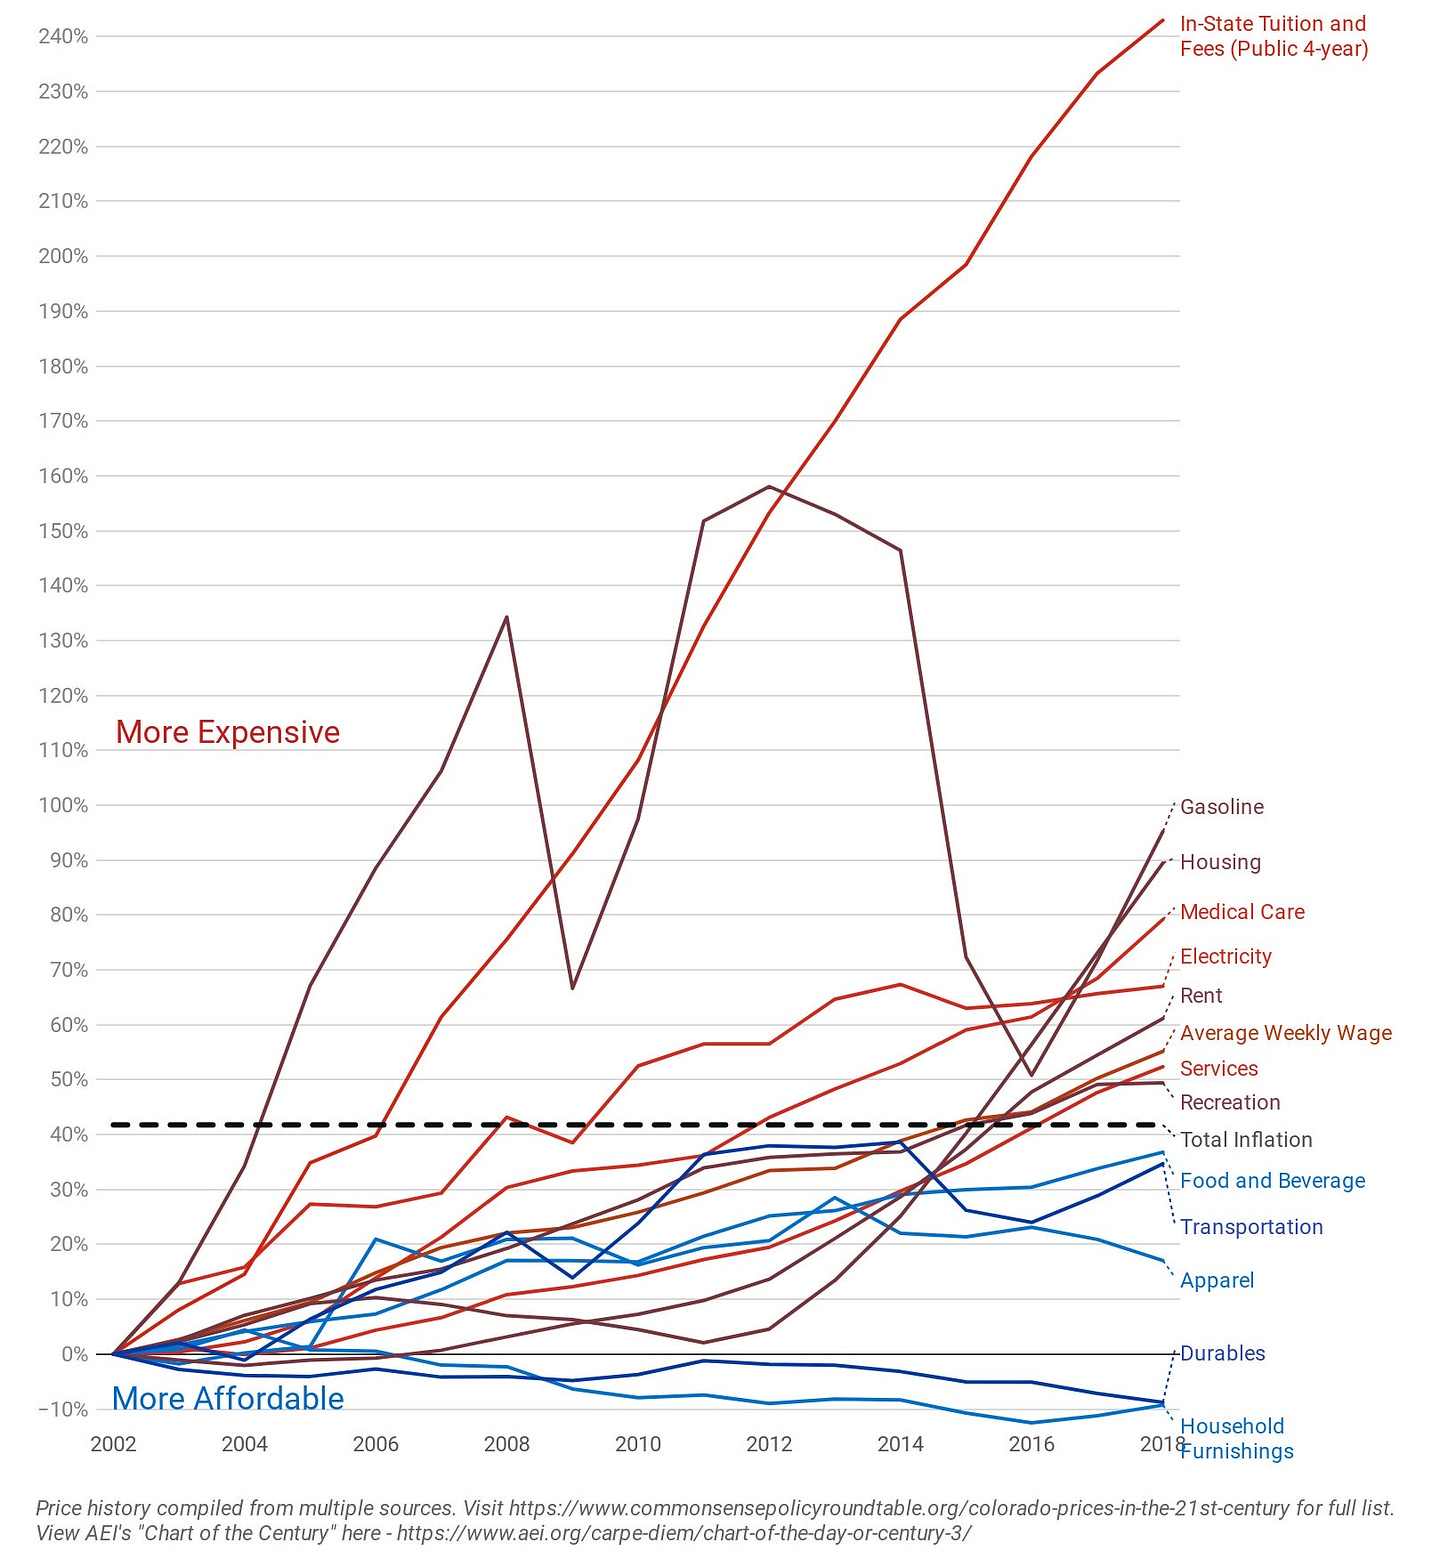 Tuition has skyrocketed far faster than inflation.